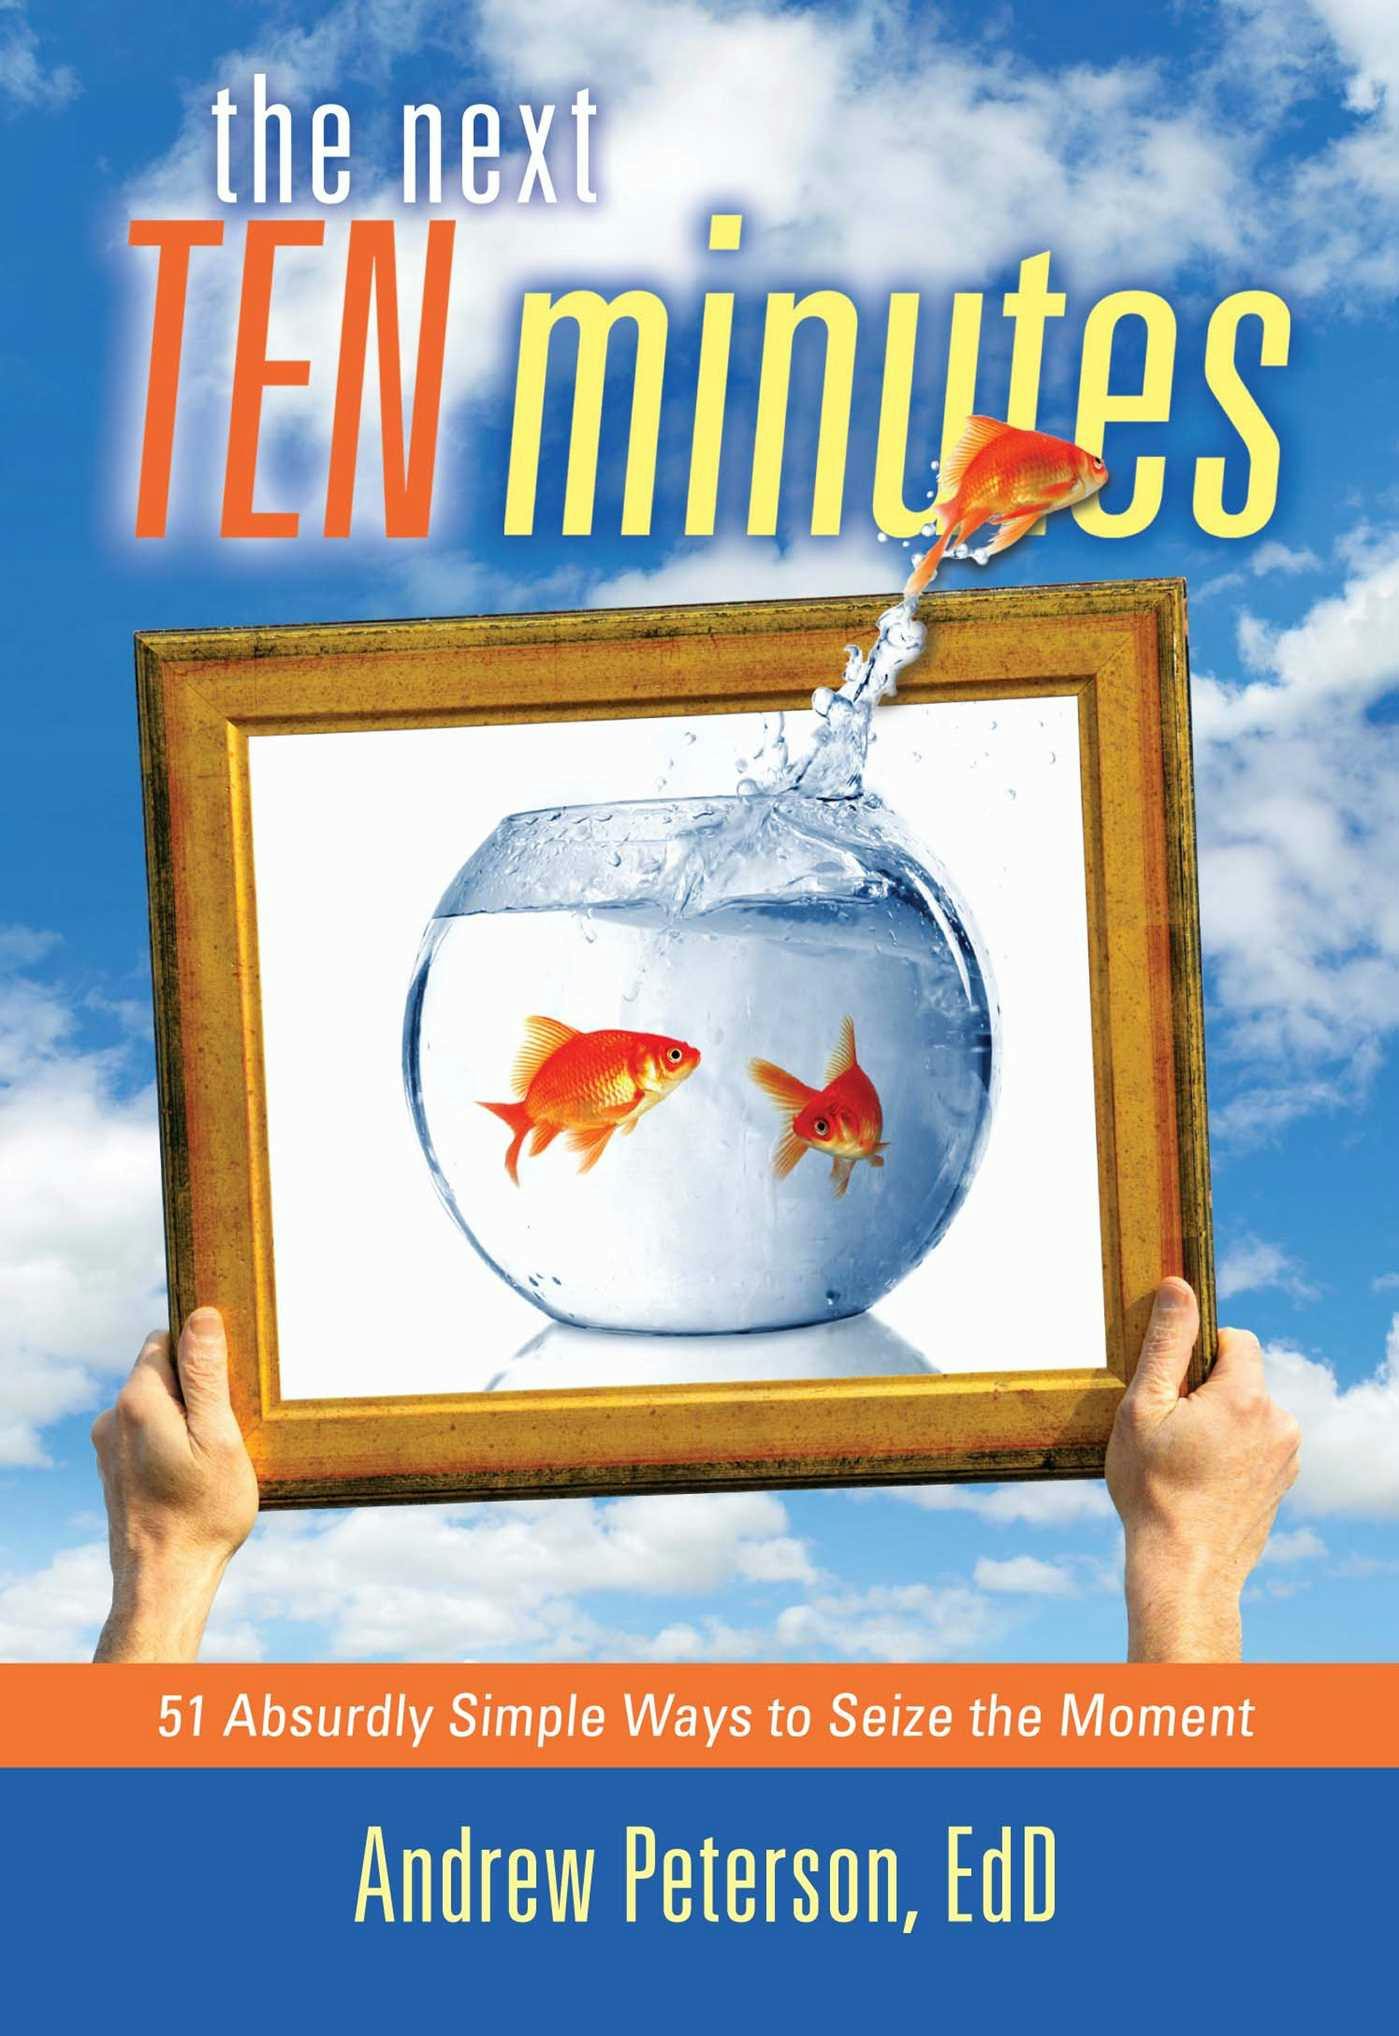 The Next Ten Minutes: 51 Absurdly Simple Ways to Seize the Moment - Andrew Peterson